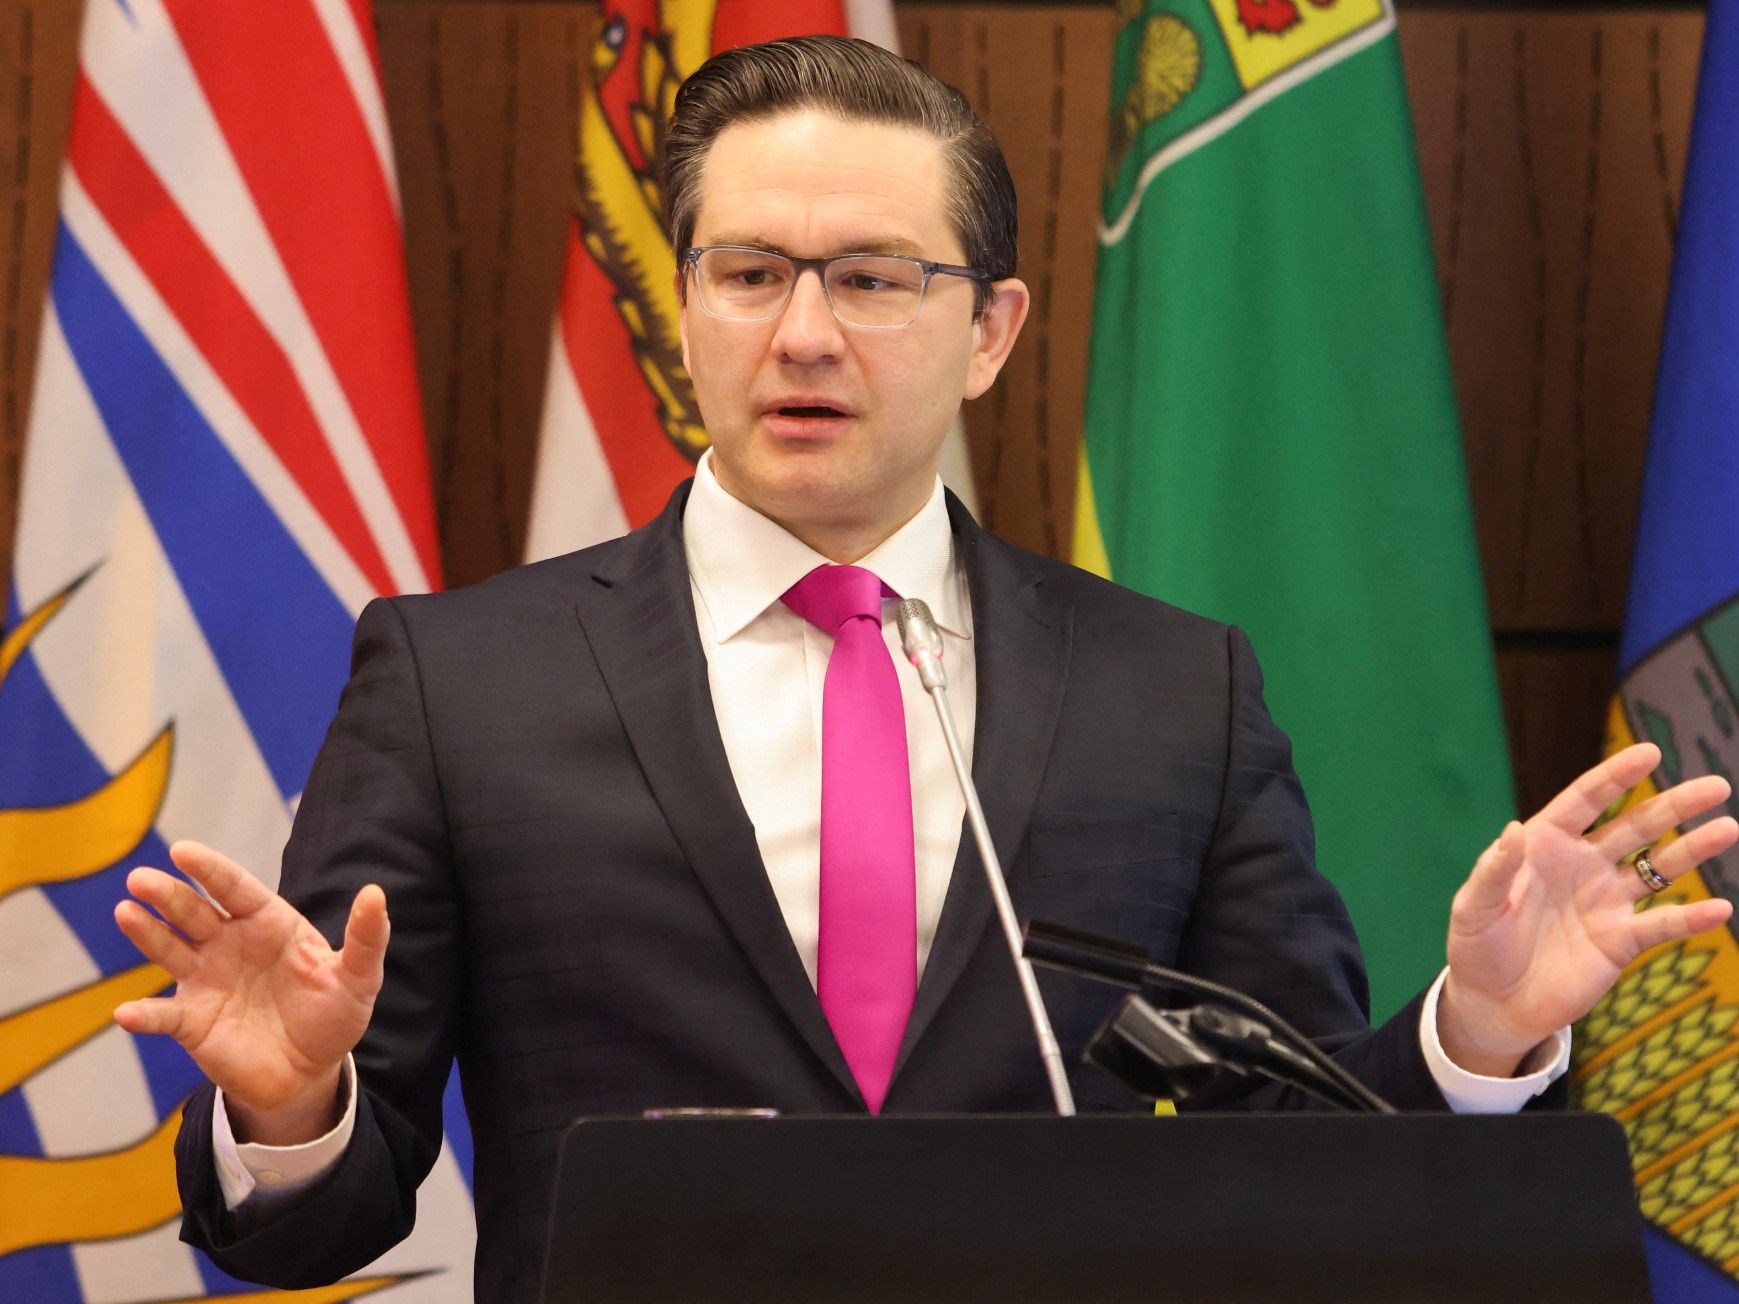 Poilievre challenges Trudeau to fix 'broken' Canada or 'get out of the
way'